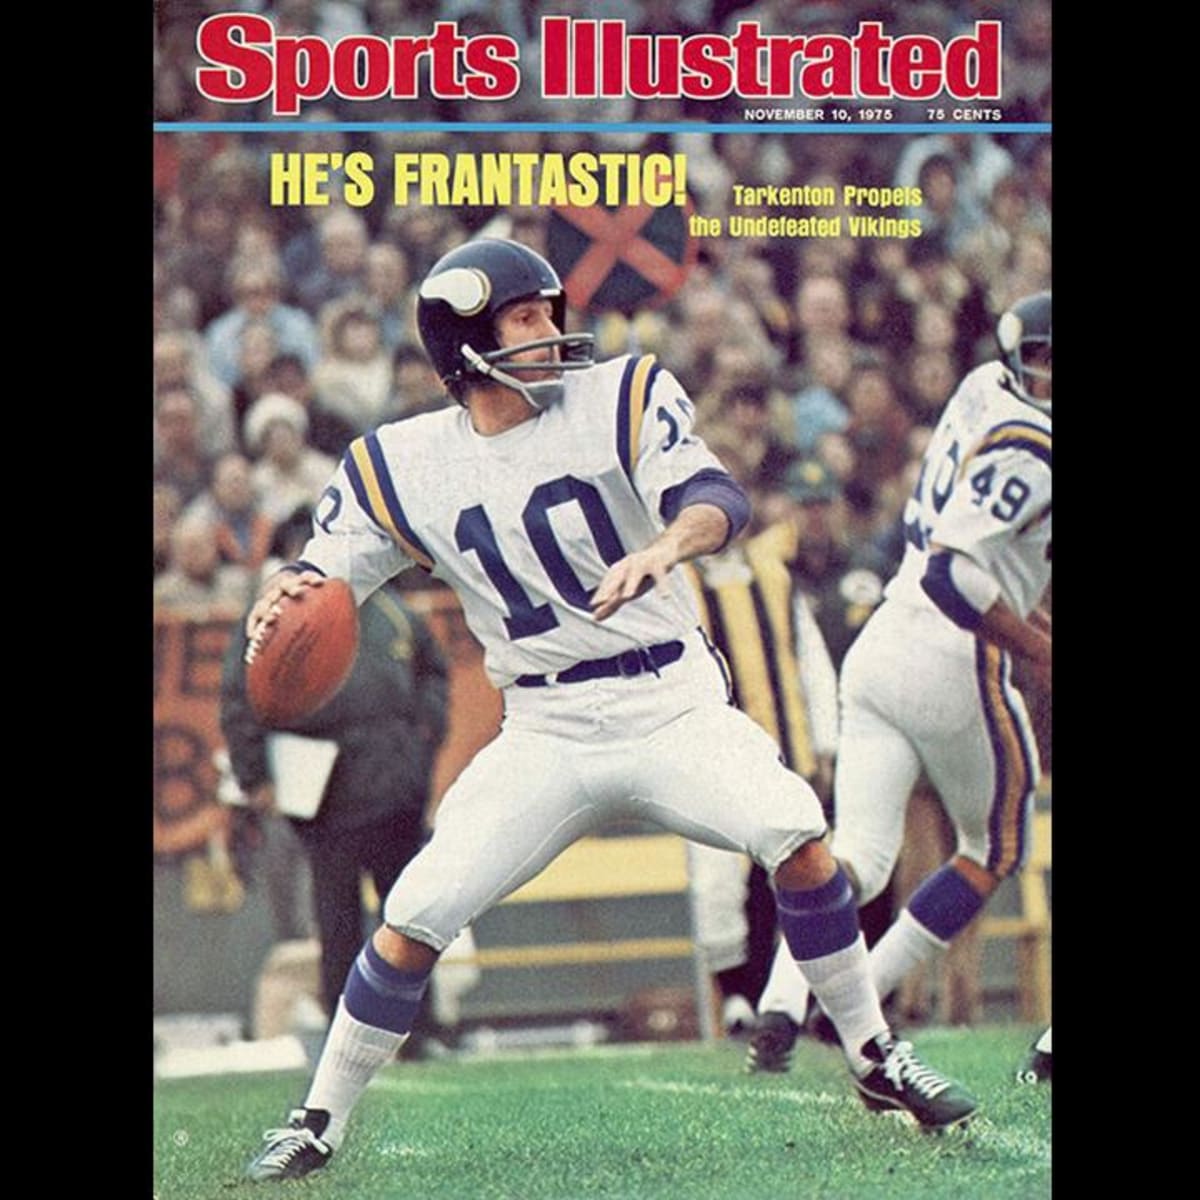 THE BEST OF THEM ALL - Sports Illustrated Vault